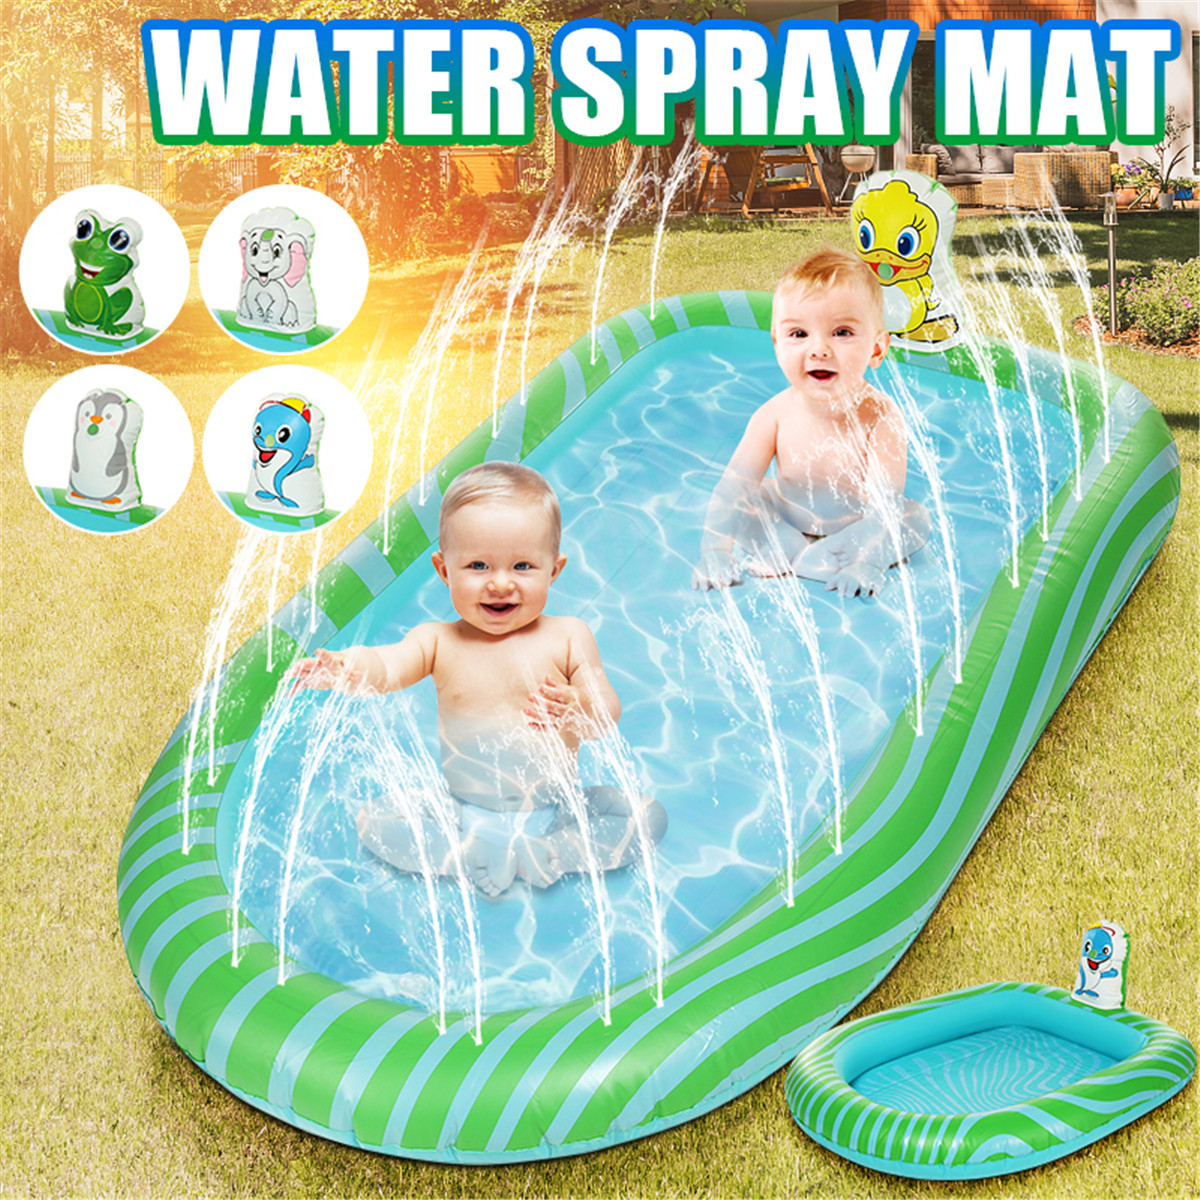 PVC-Children-Inflatable-Swimming-Pool-Sprinkler-Pool-Thickened-Cartoon-Pattern-Outdoor-Swimming-Wate-1851764-1